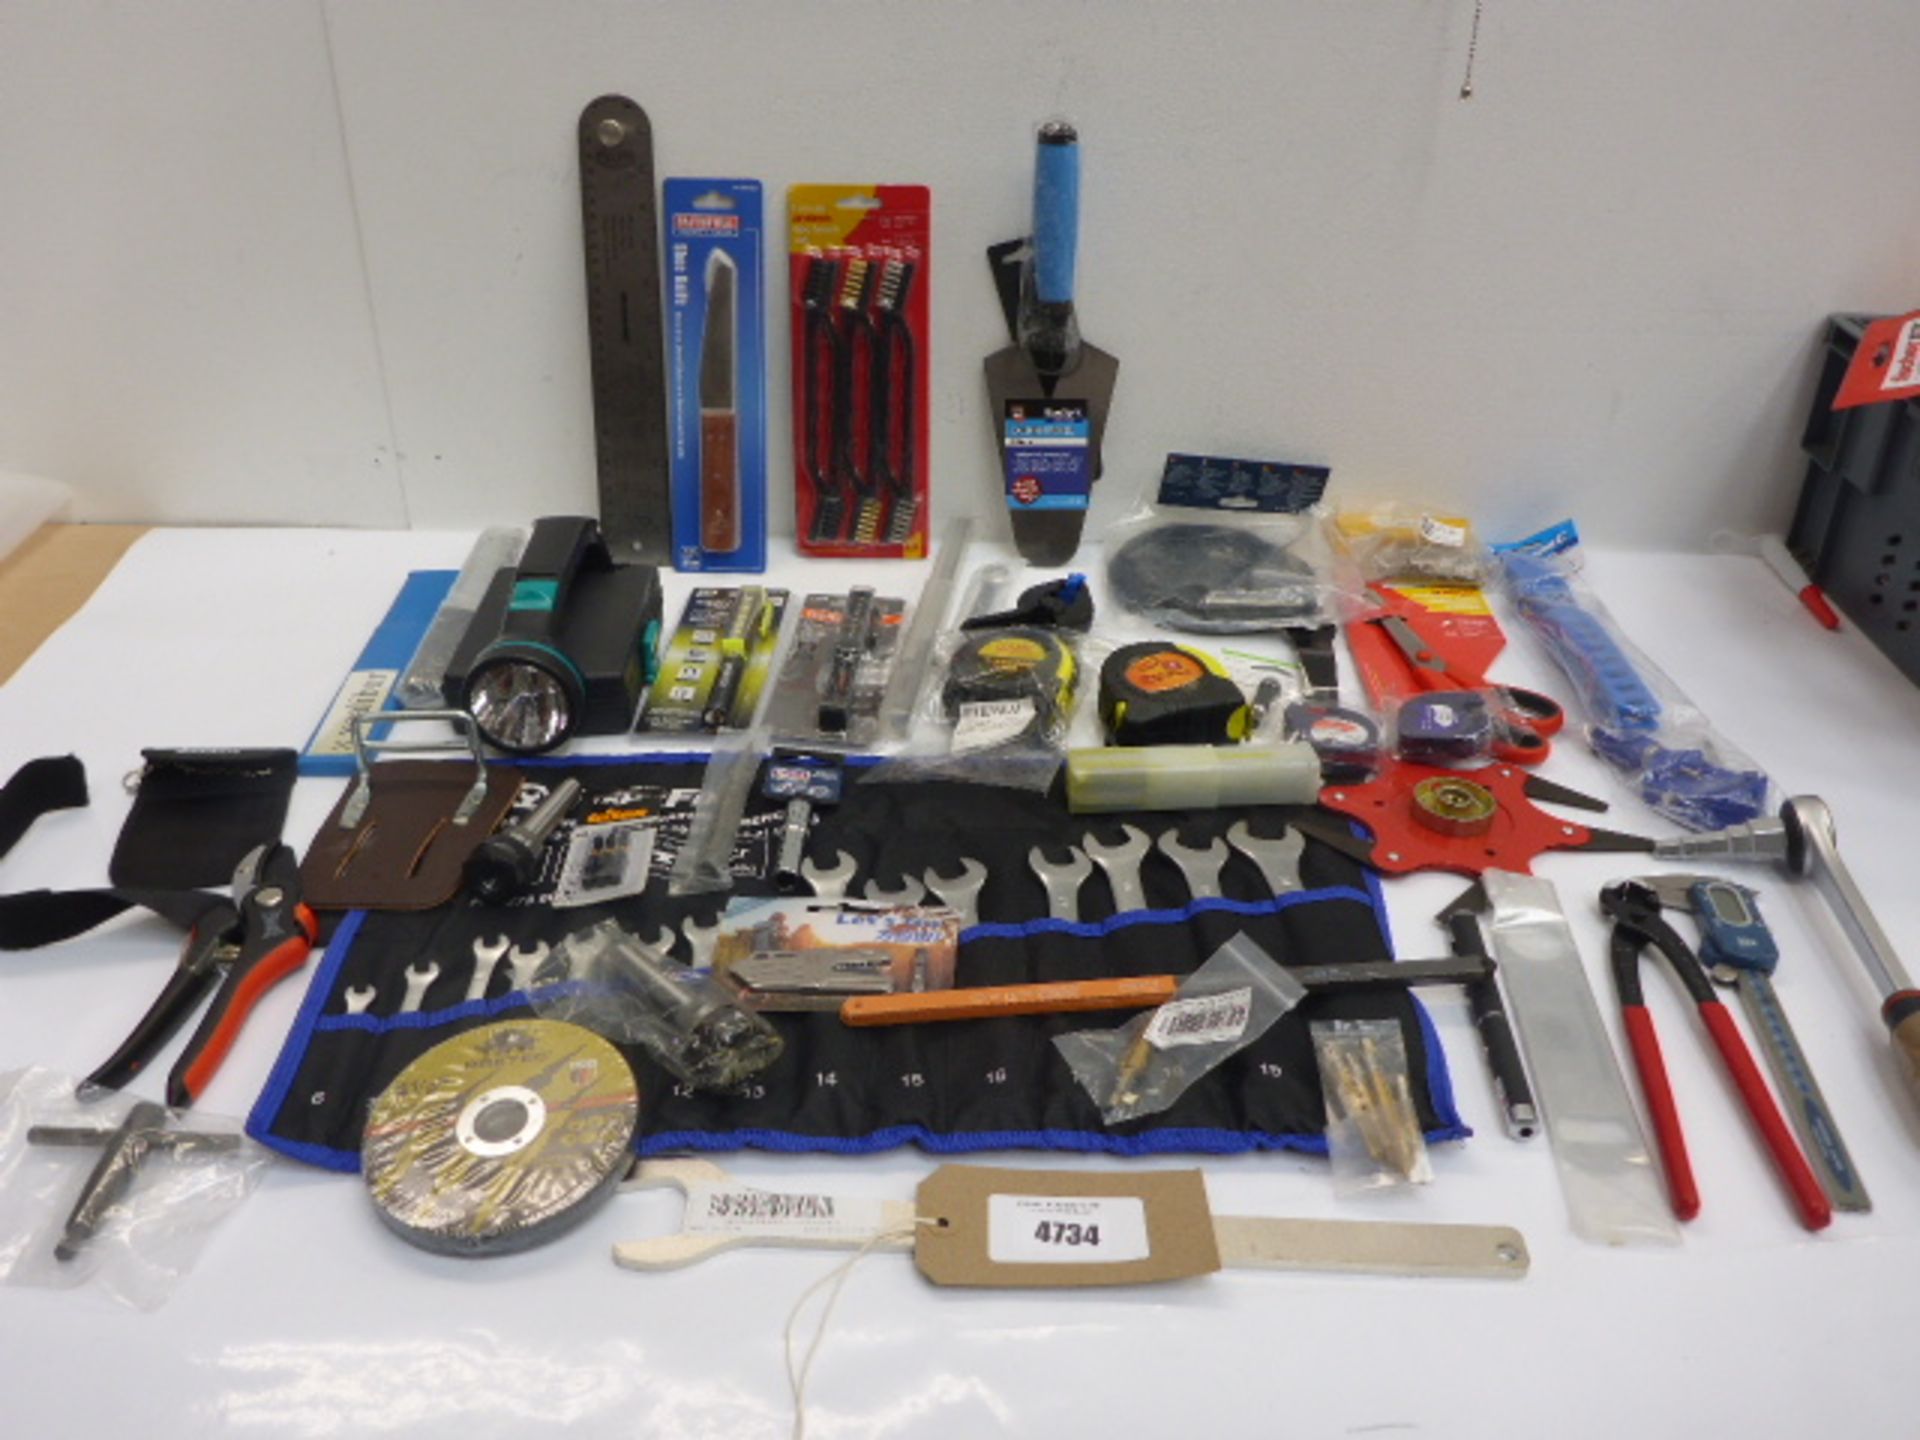 Blue Spot trowel, Silverline sharp angle, torches, tape measures, spanners & pouch, hammer loop,